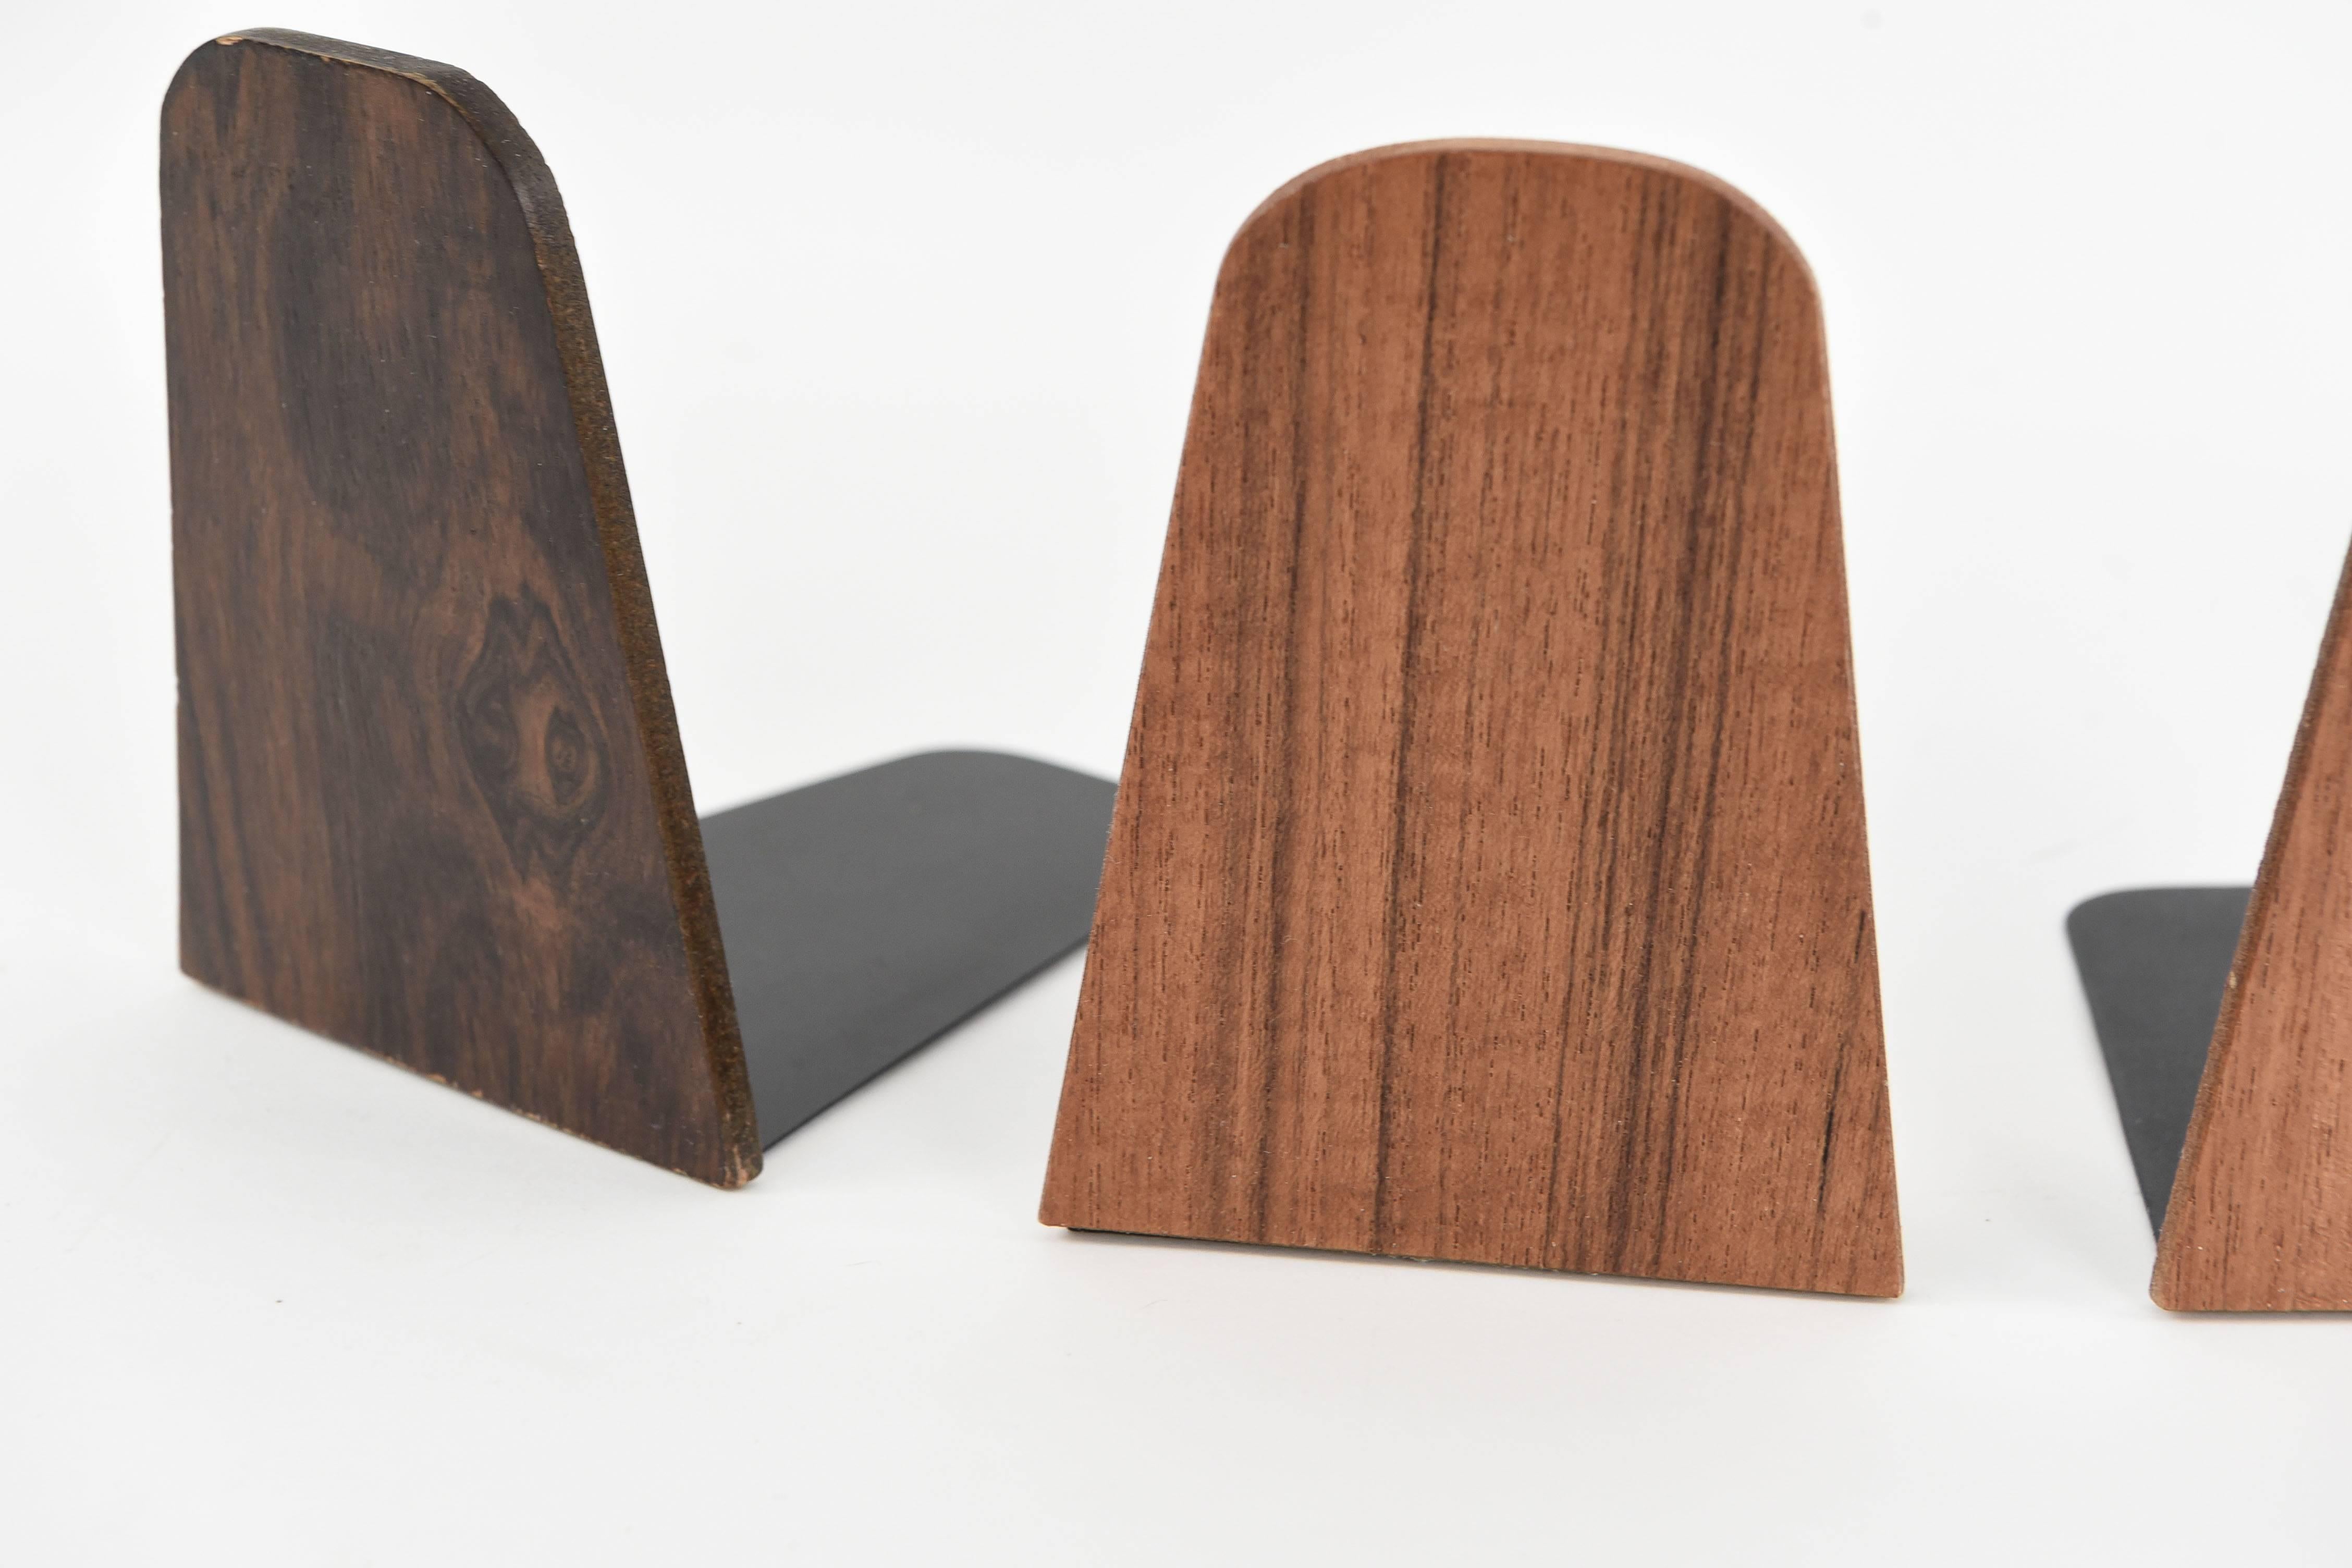 Four beautiful teak bookends in two different shades. These bookends would make a wonderful addition to any bookcase, with great support plus a slim design.